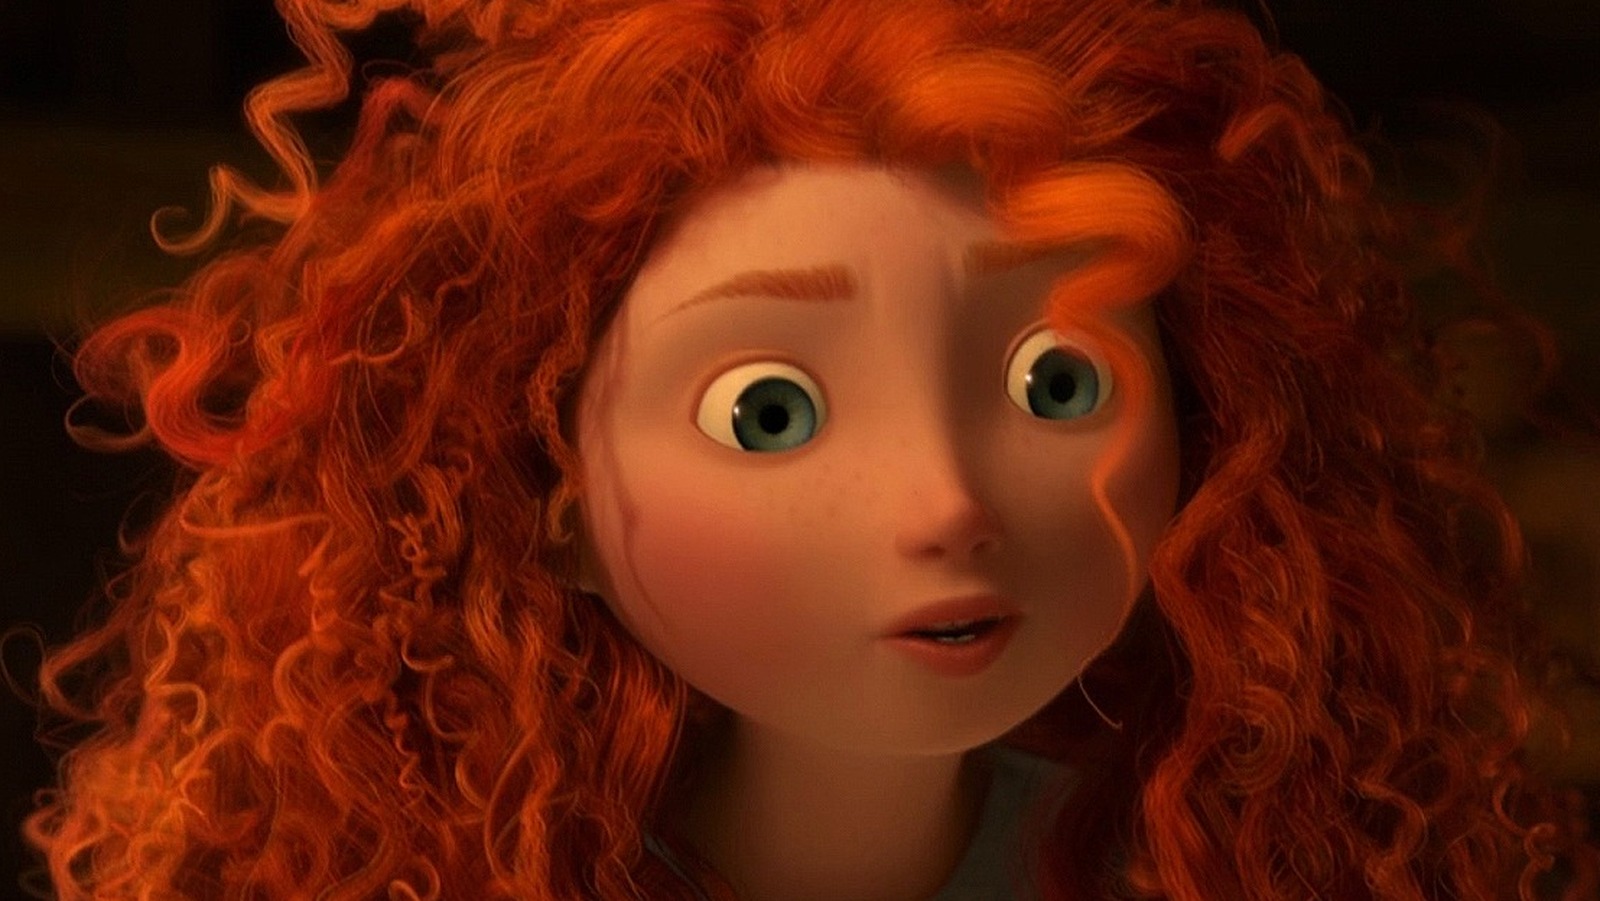 The Princess Merida Design Change That Probably Shouldn't Have Been Greenlit